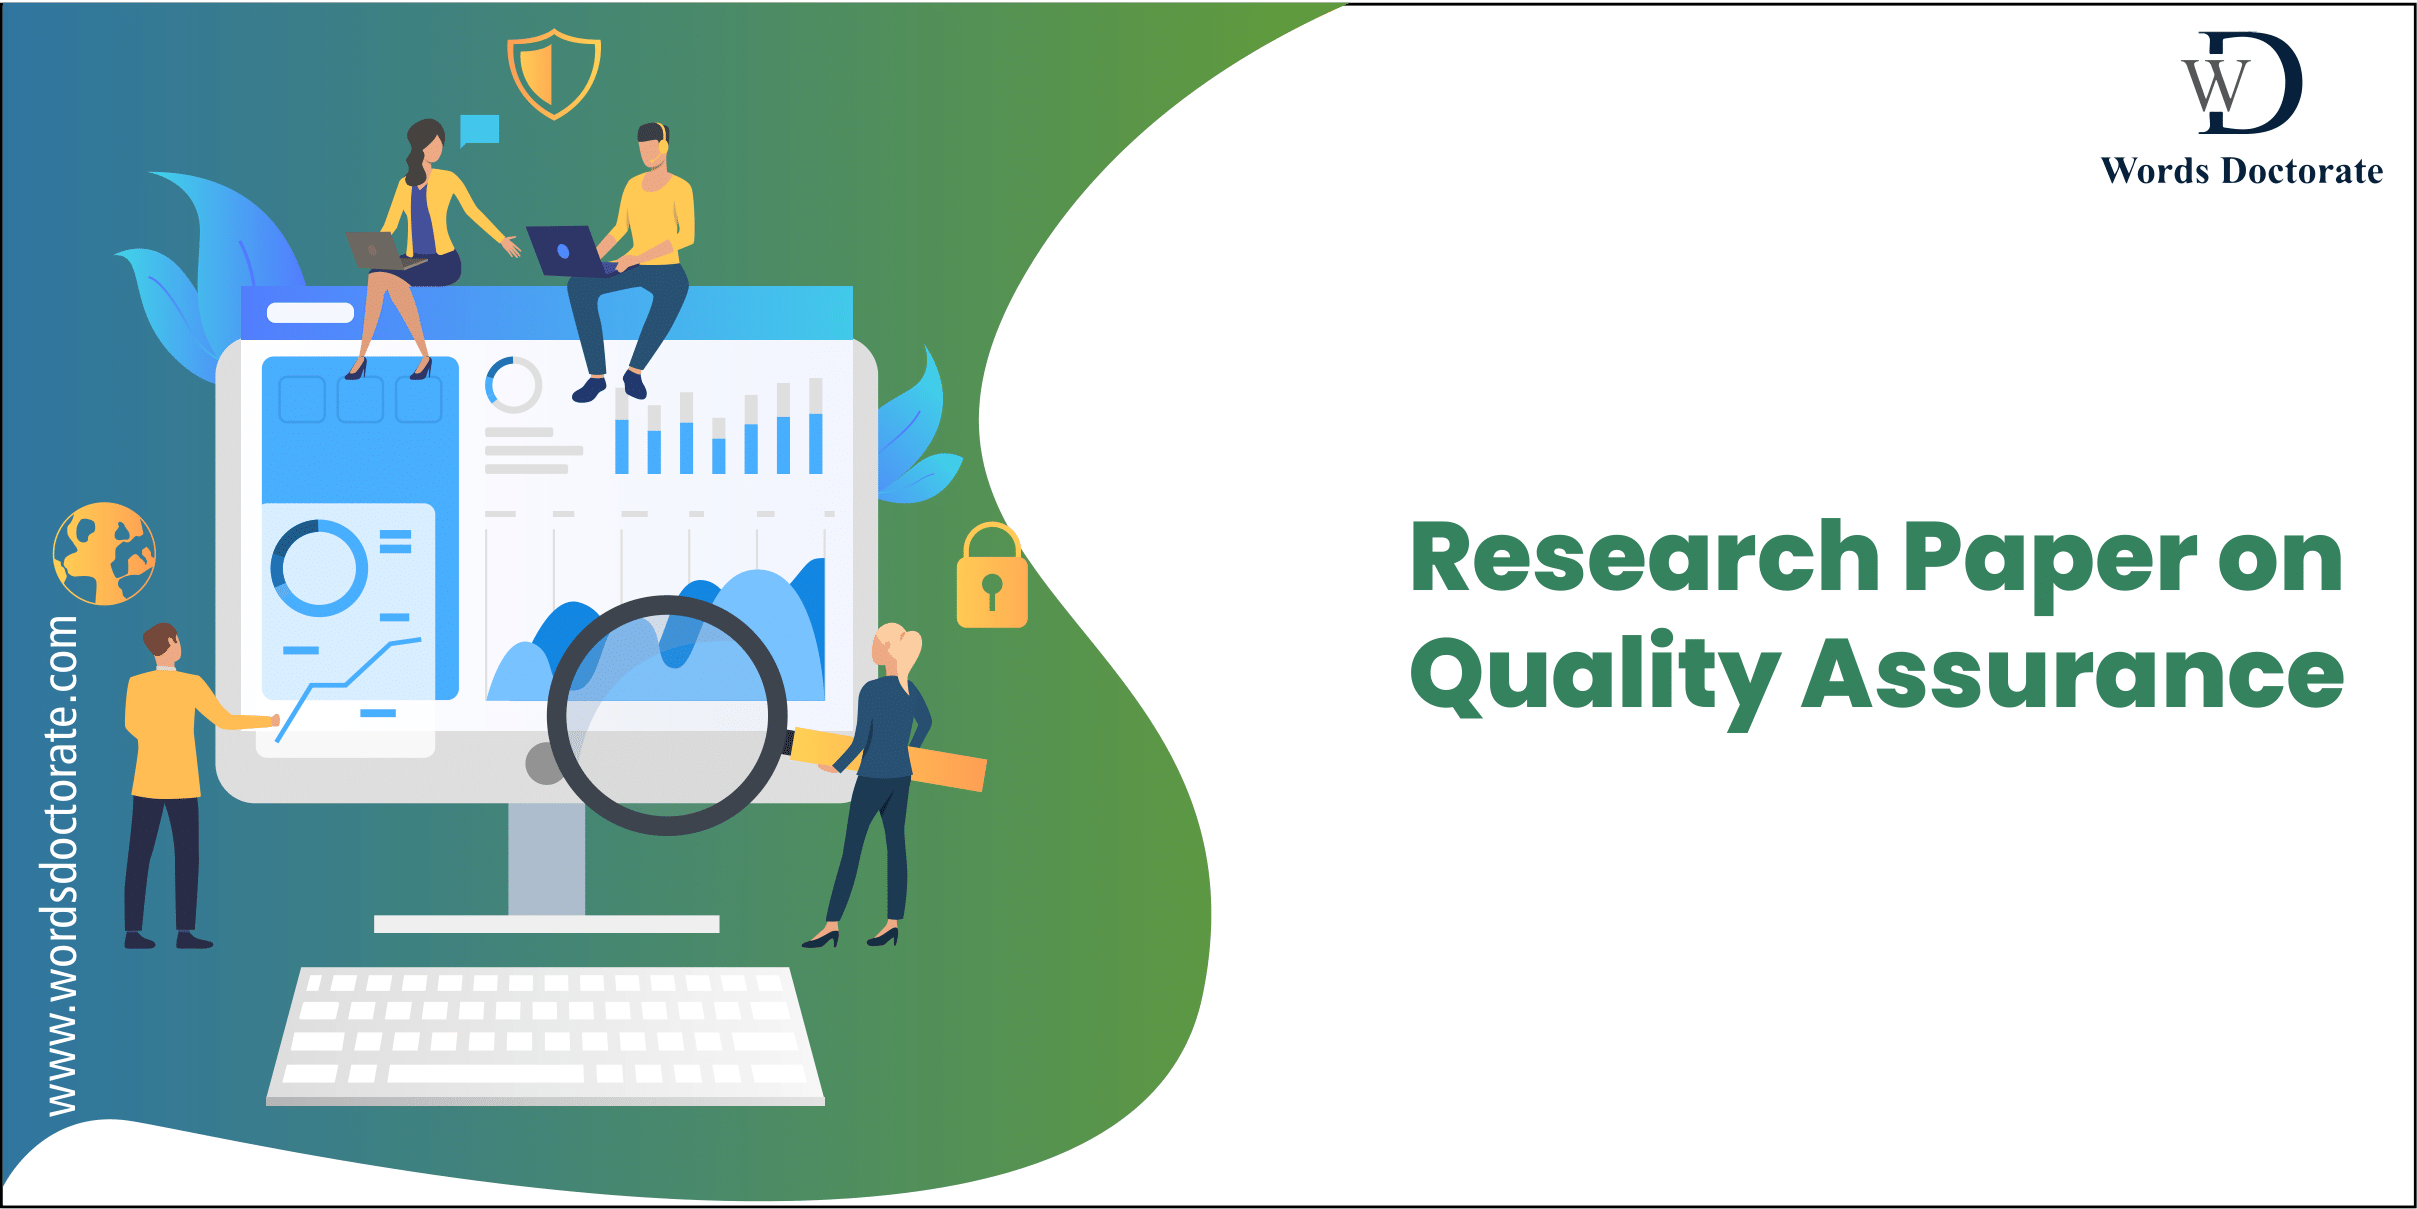 Research Paper on Quality Assurance